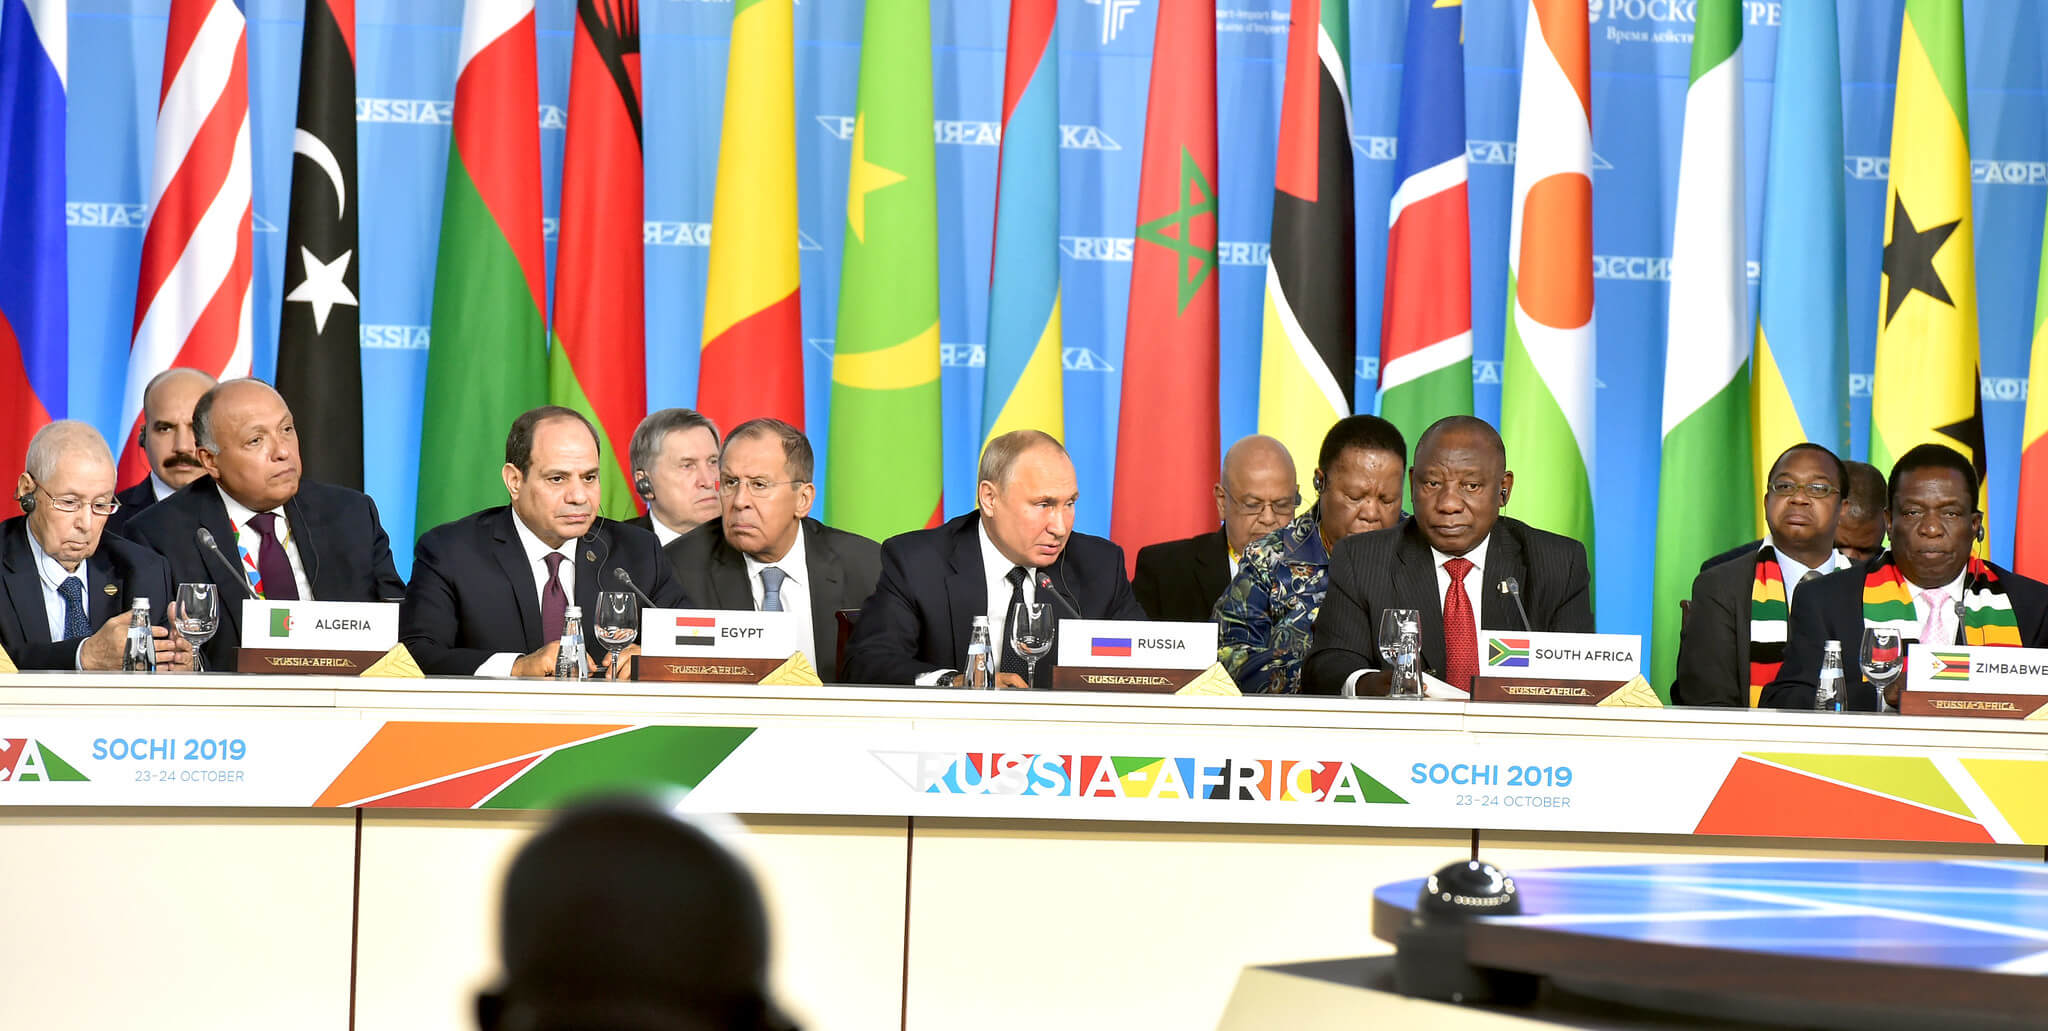 Photo: "Russia-Africa Summit," by GovernmentZA licensed under CC BY-ND 2.0.